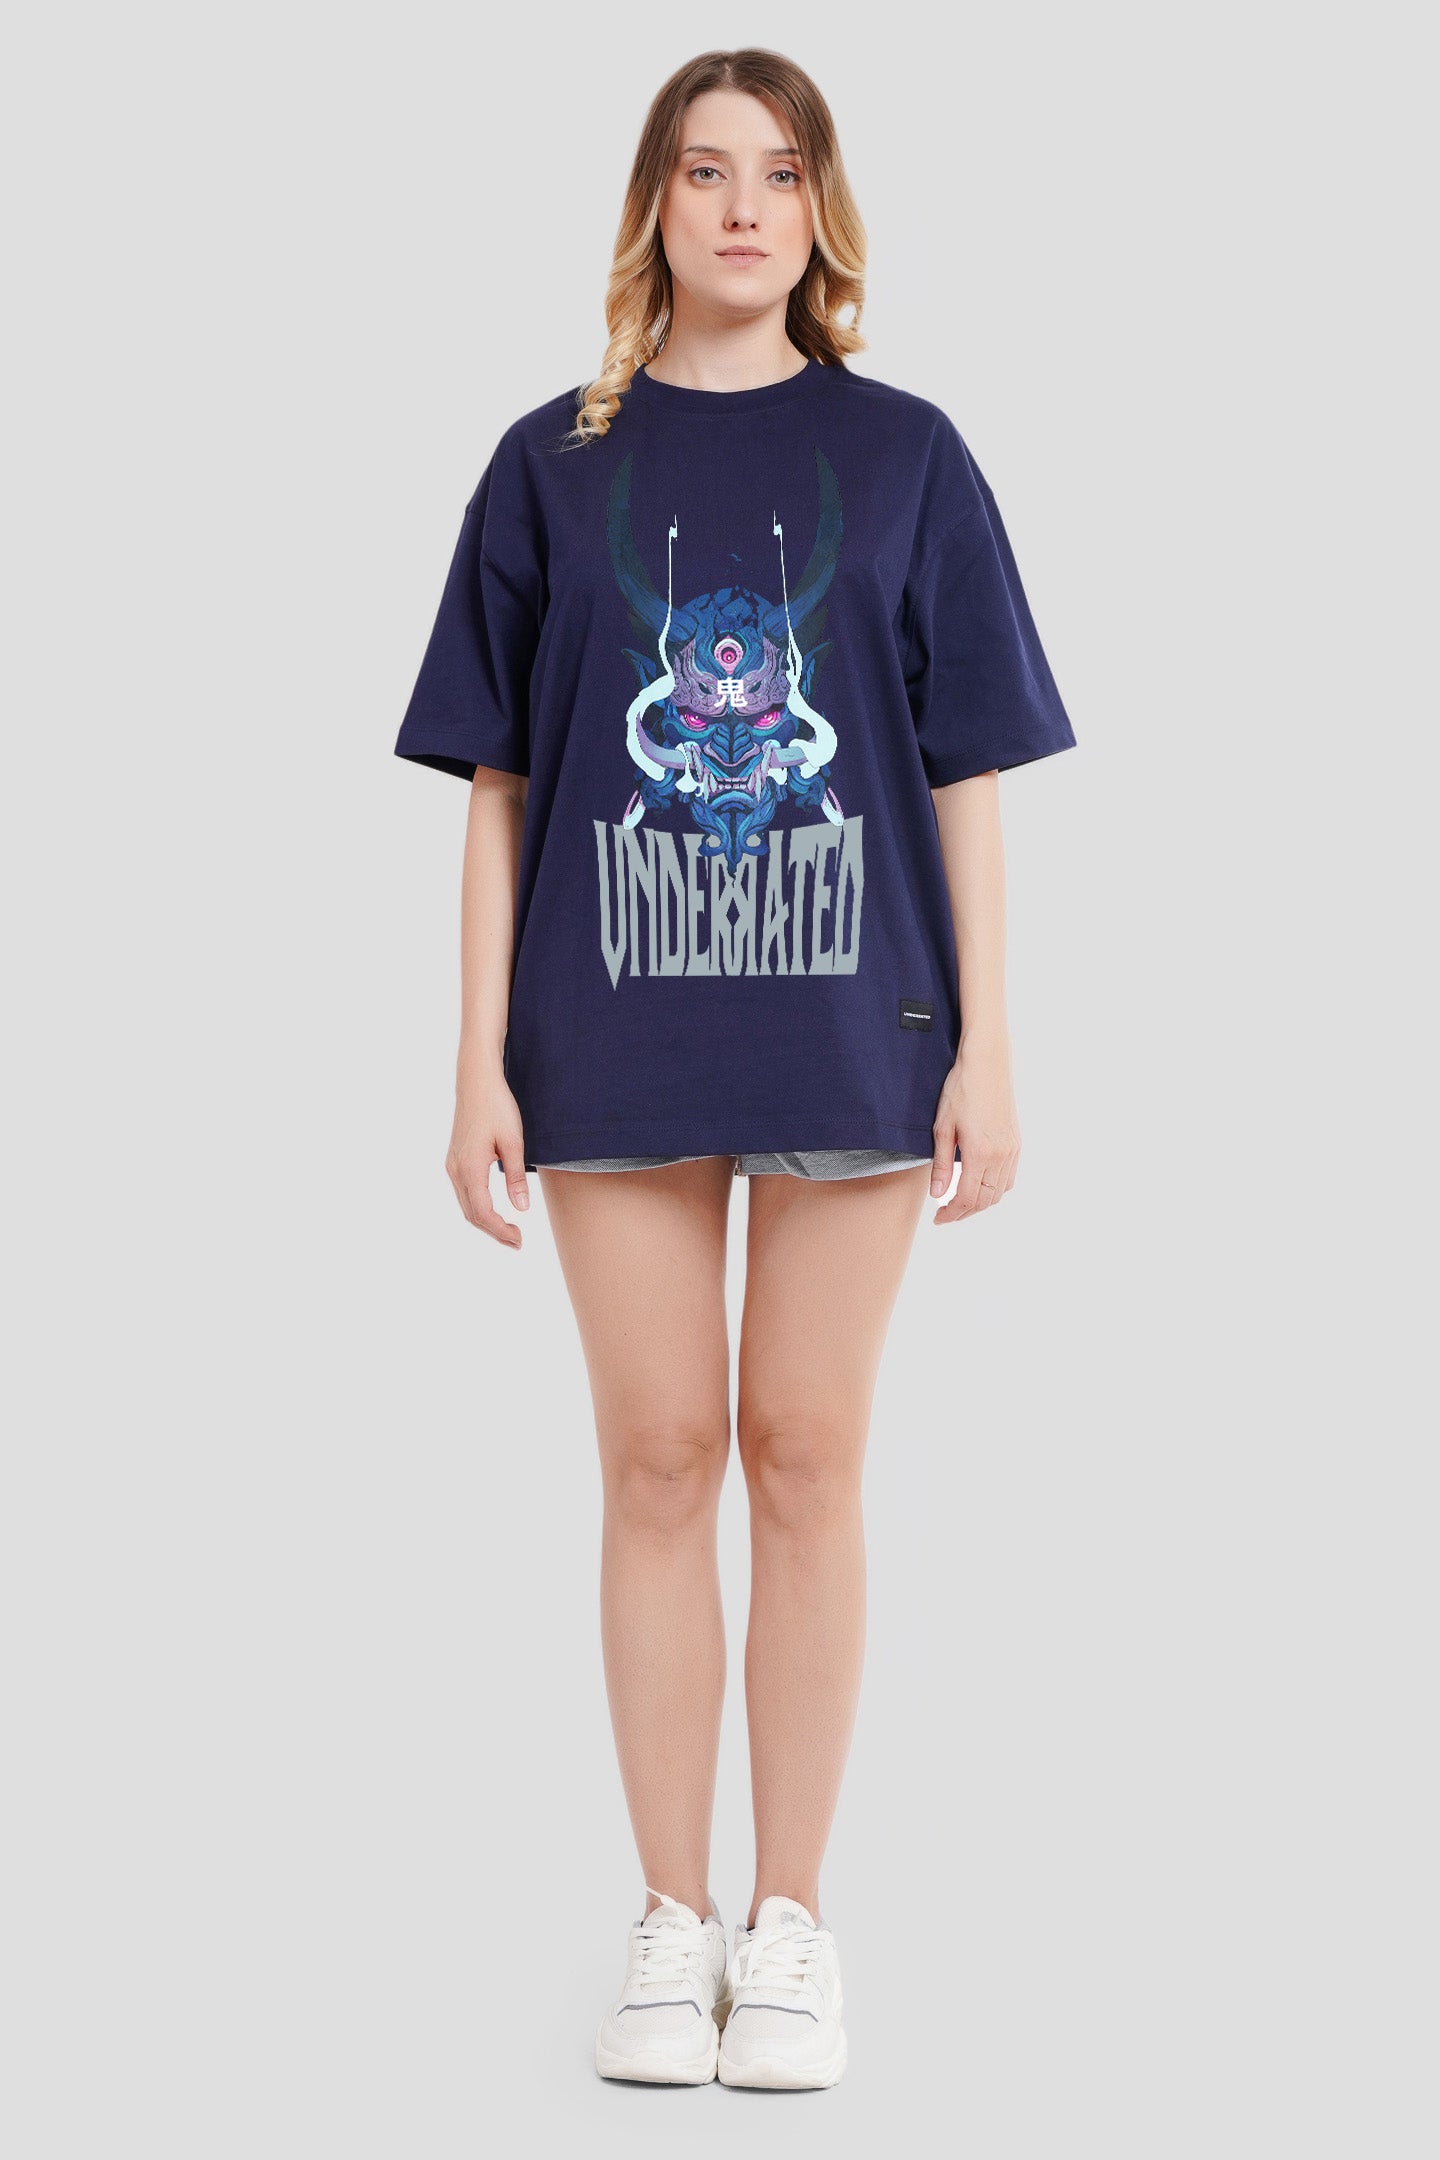 Samurai Vendetta Navy Blue Printed T Shirt Women Oversized Fit With Front And Back Design Pic 1